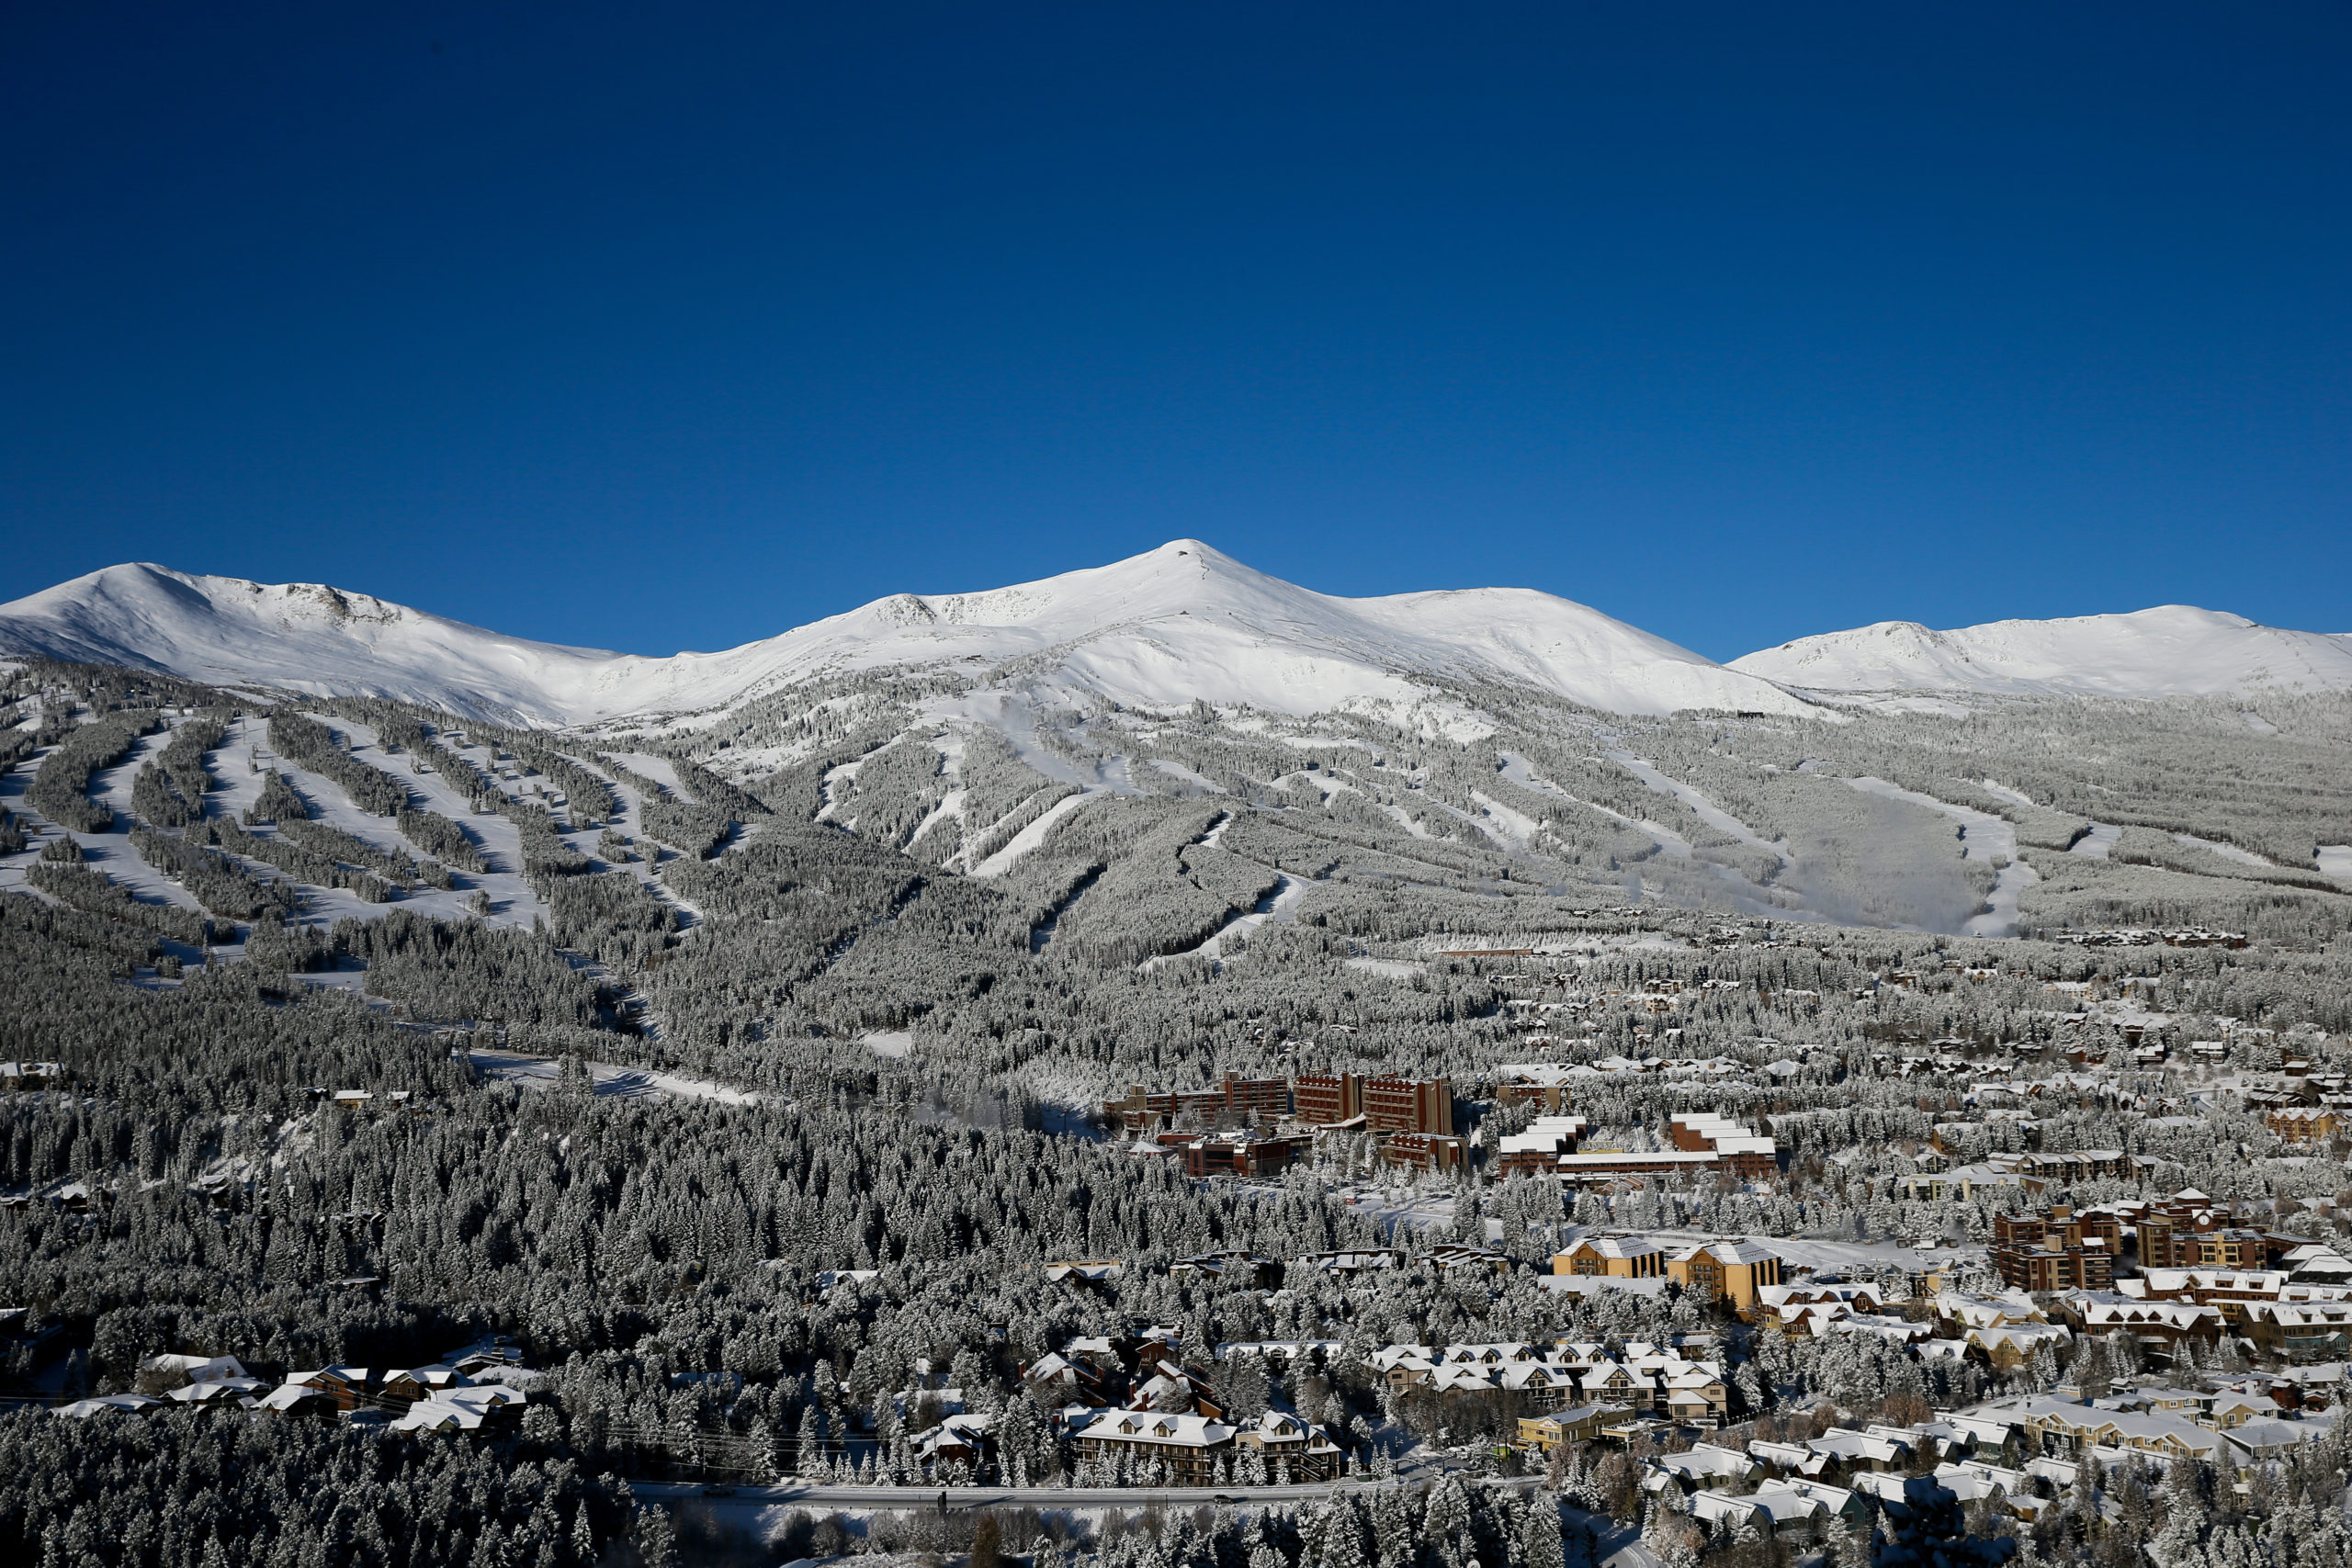 Breckenridge Town and Mountain with winter snow. - Image by Austyn Dineen